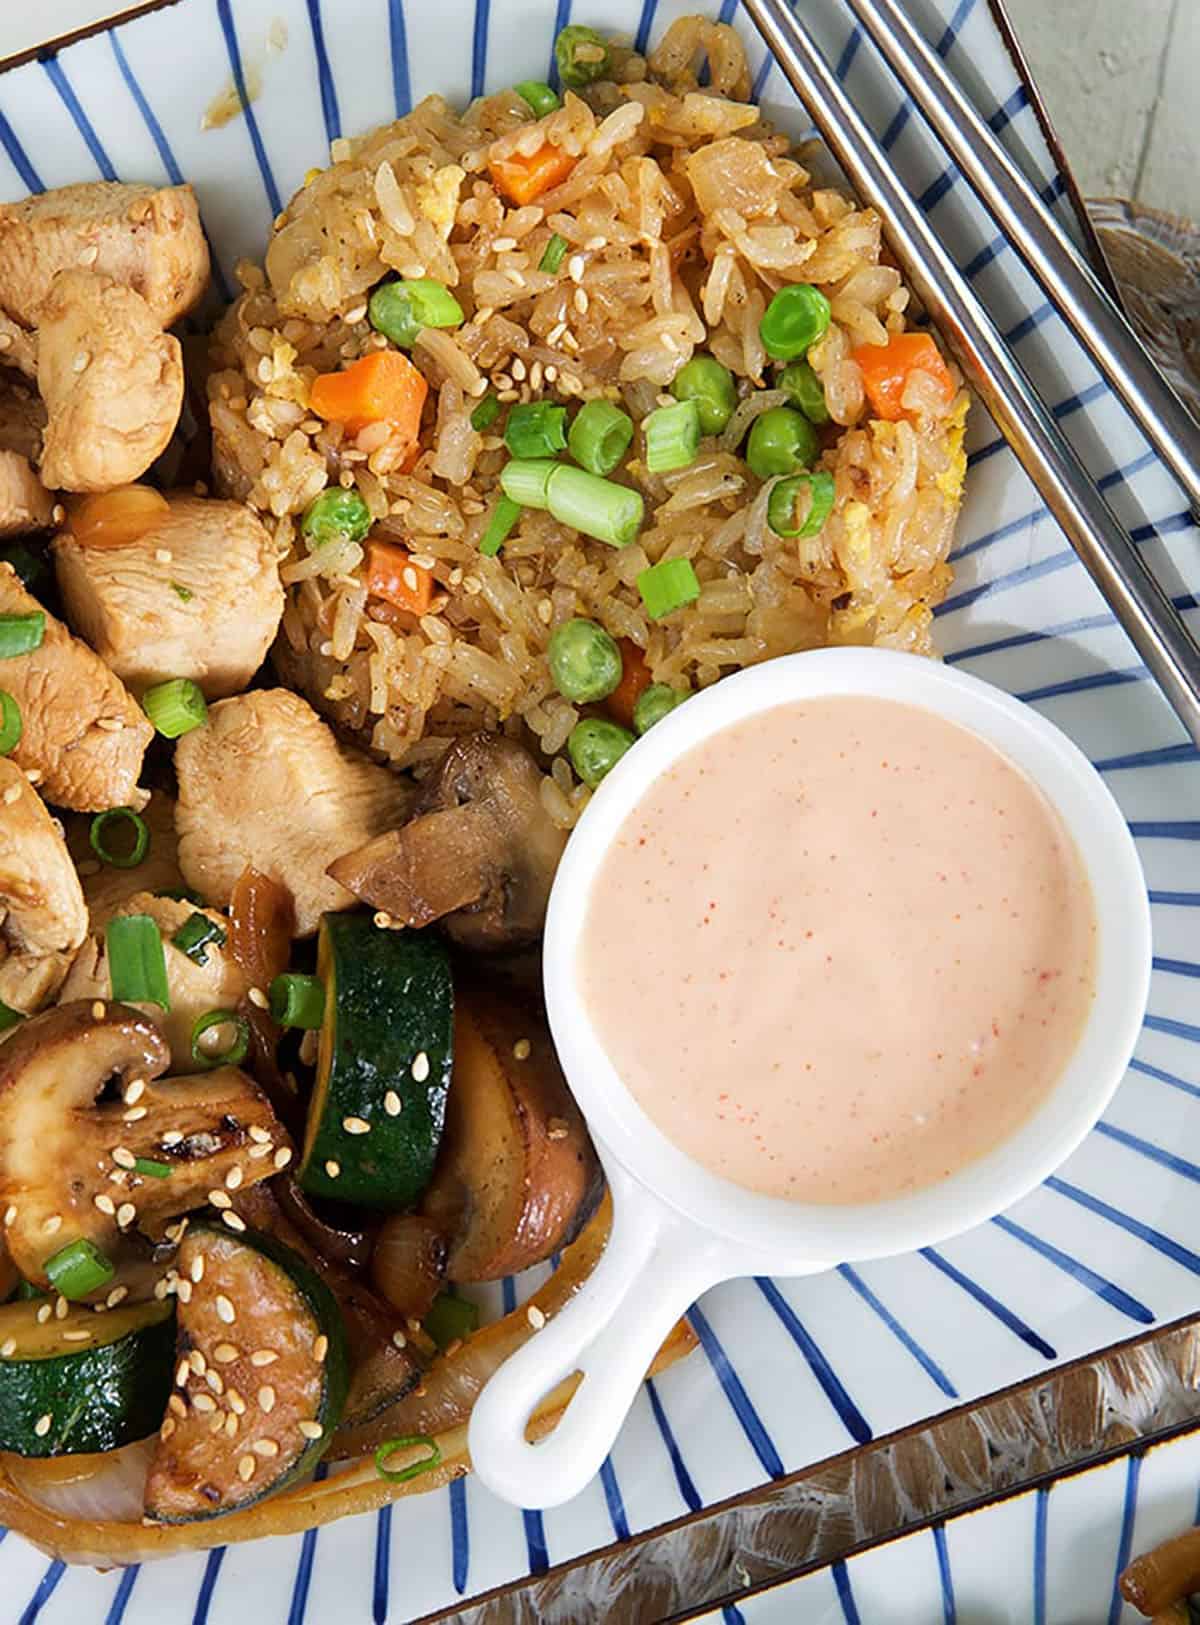 Fried rice is served with yum yum sauce and hibachi chicken.